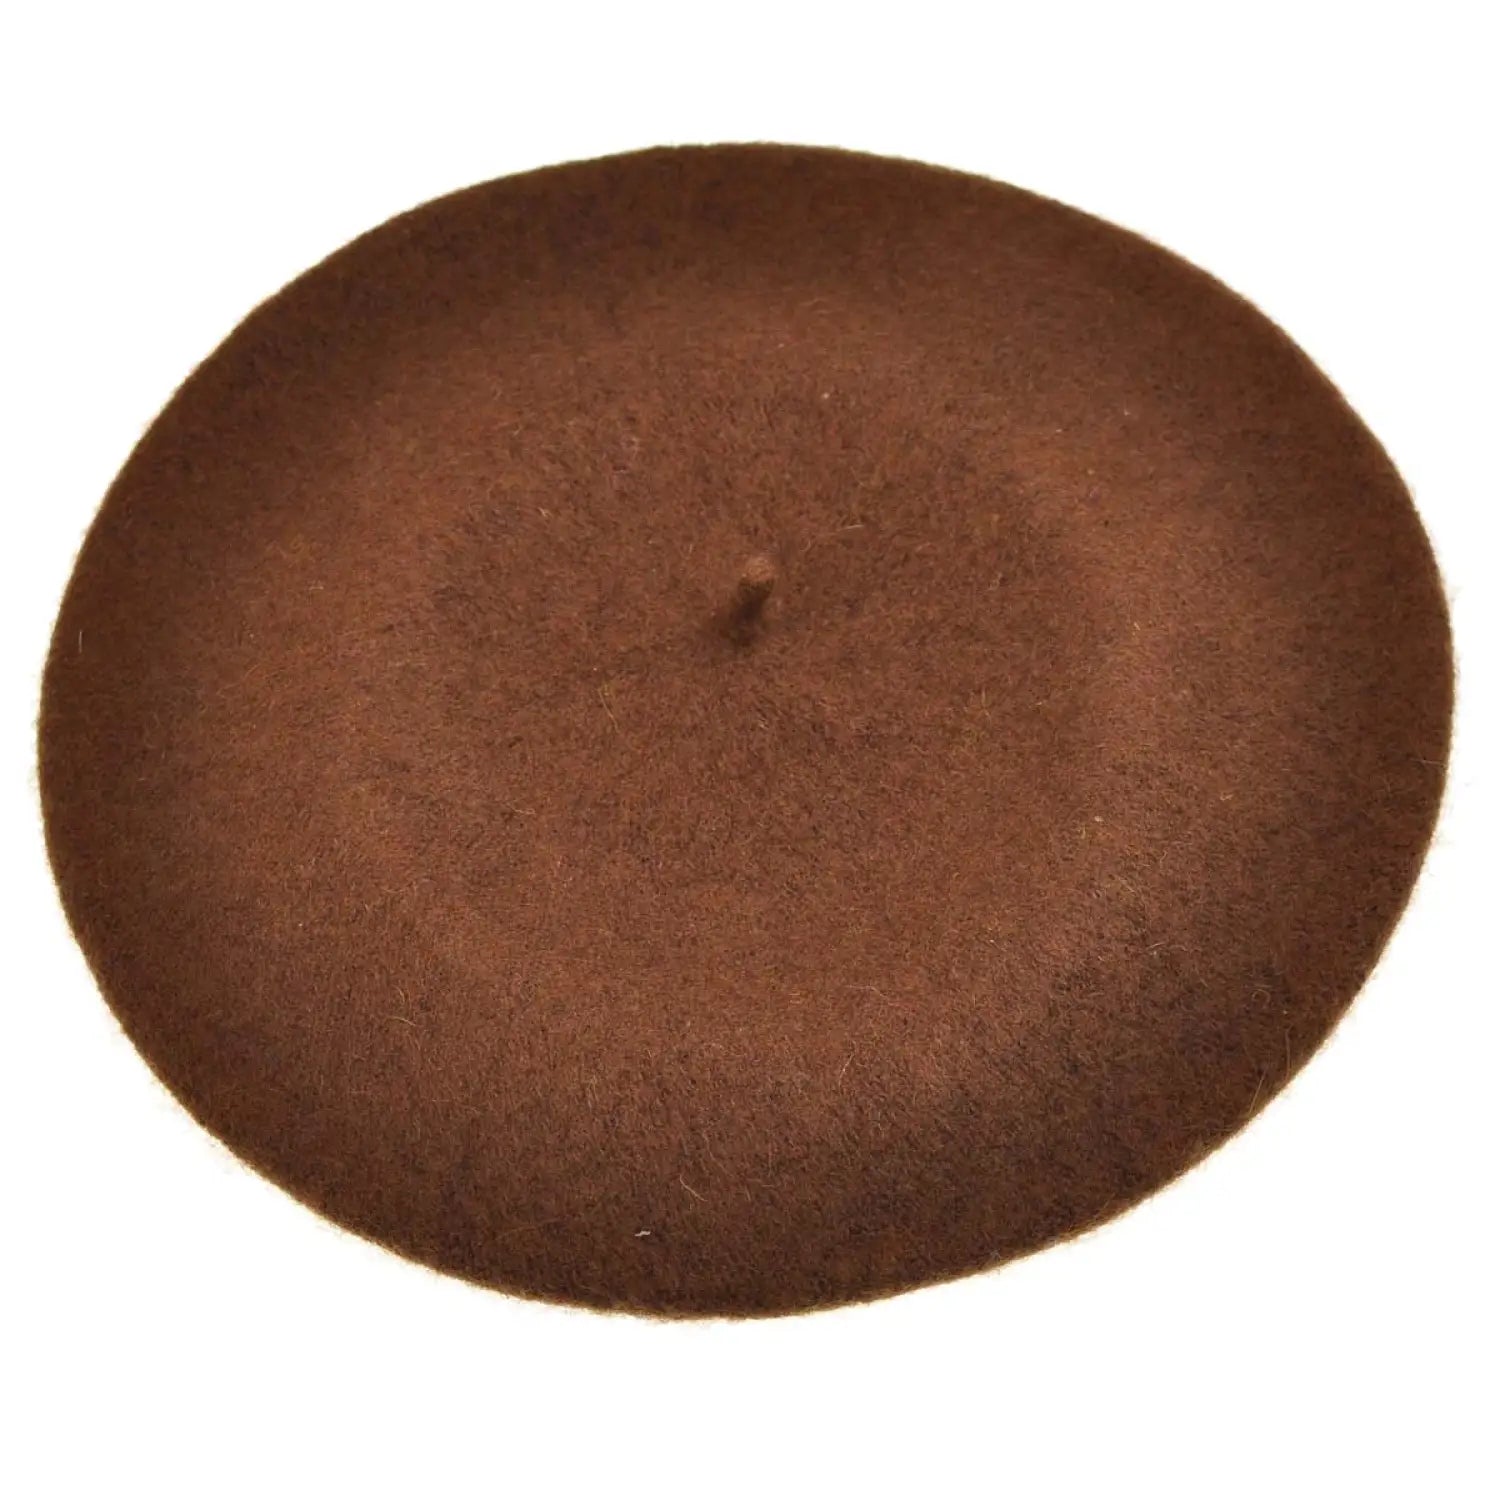 Brown French Wool Beret on White Background